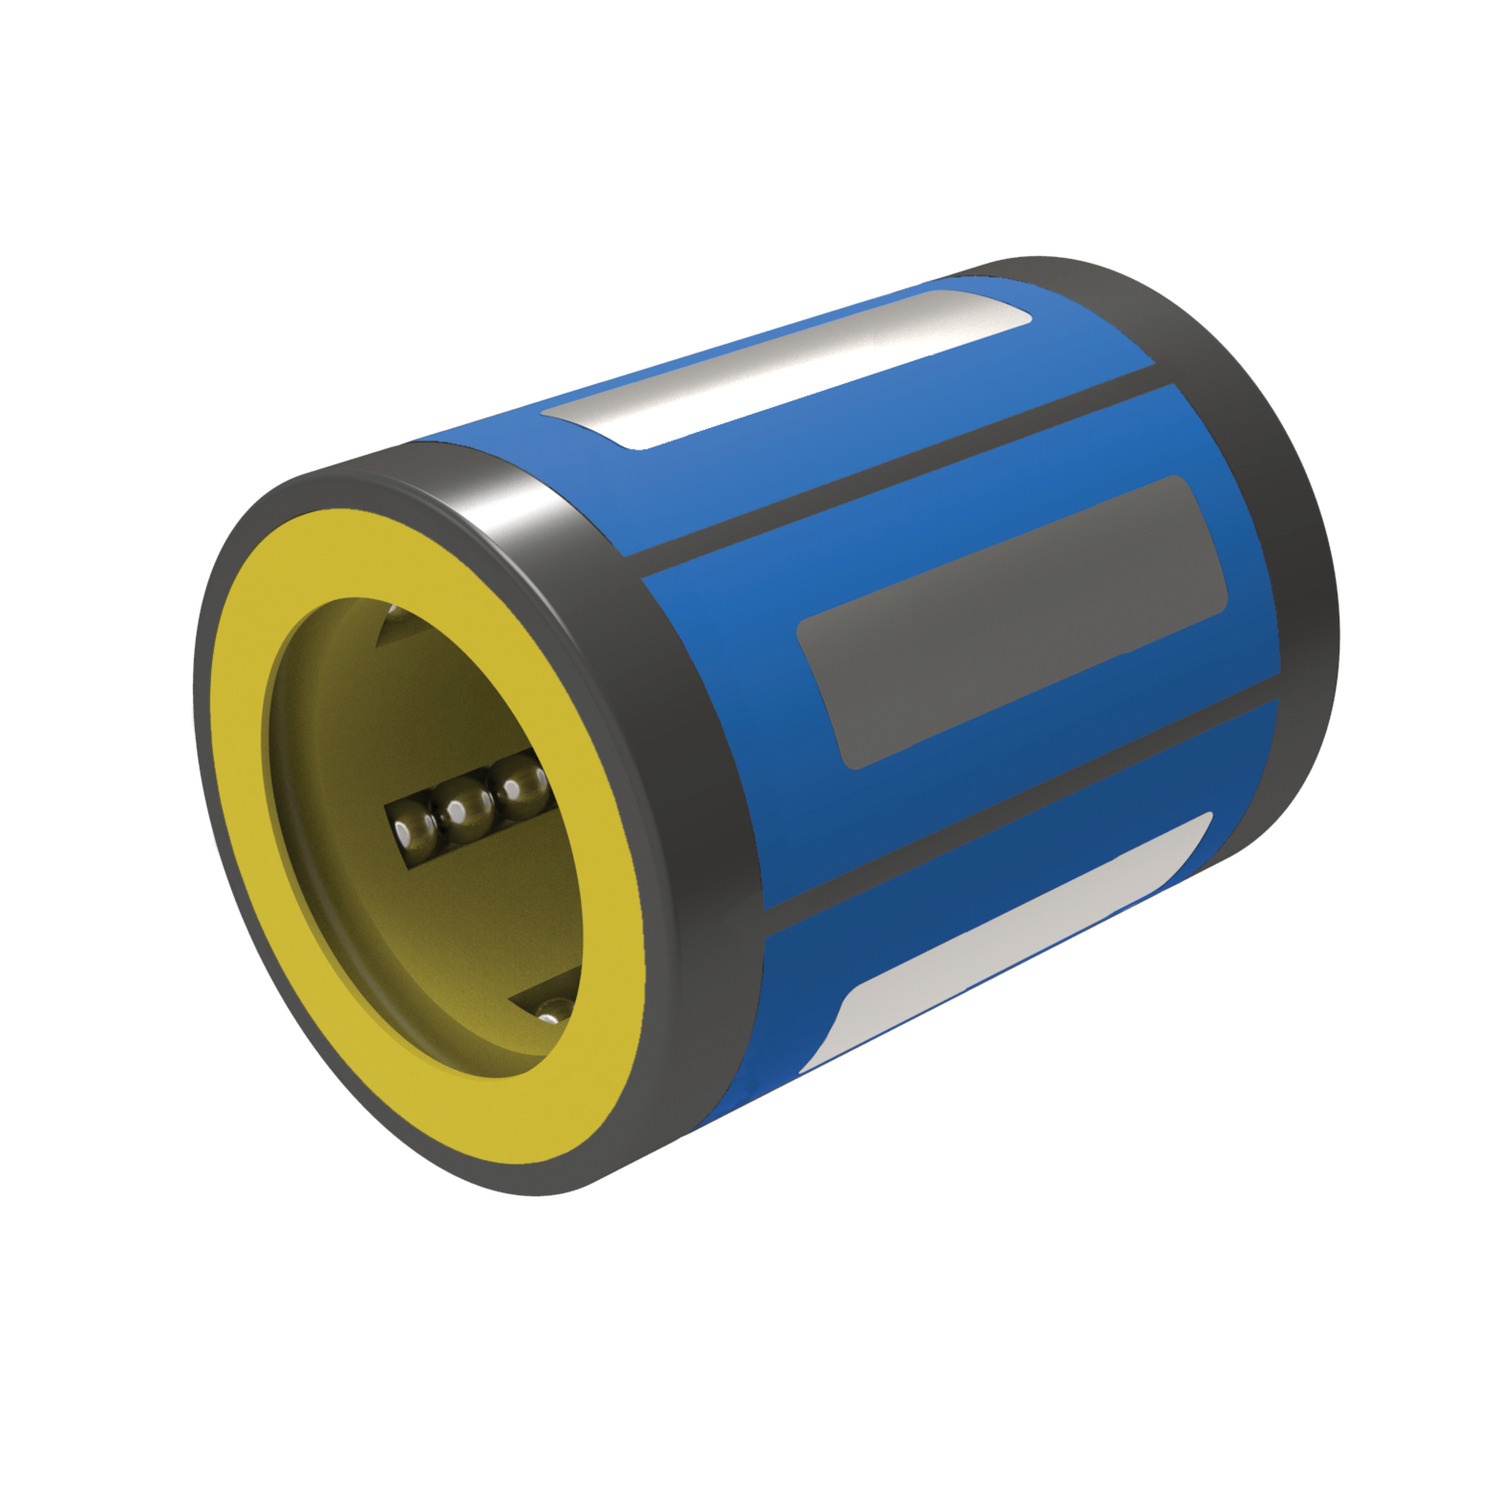 Product L1715, Compact Linear Ball Bushings Compact size / 